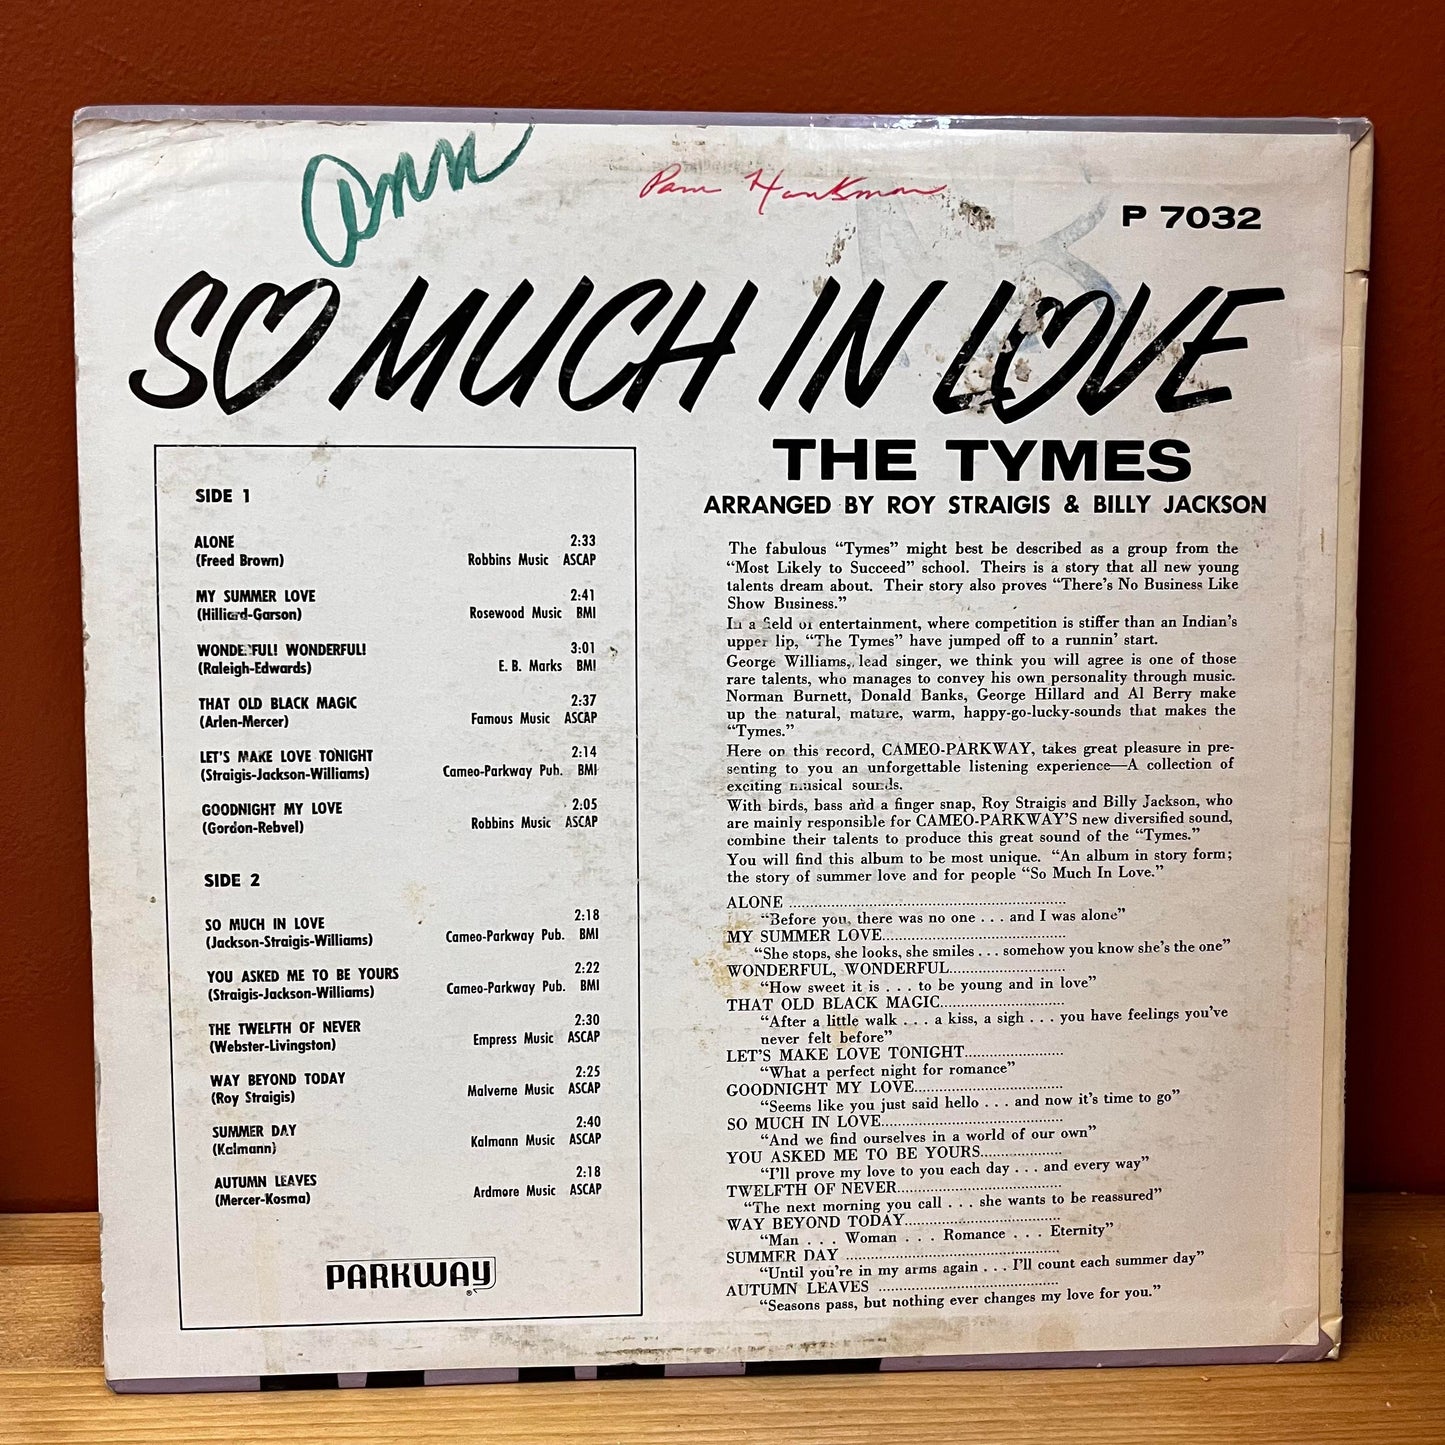 So Much In Love: The Story of a Summer Love - The Tymes P-7032 Used Vinyl VG